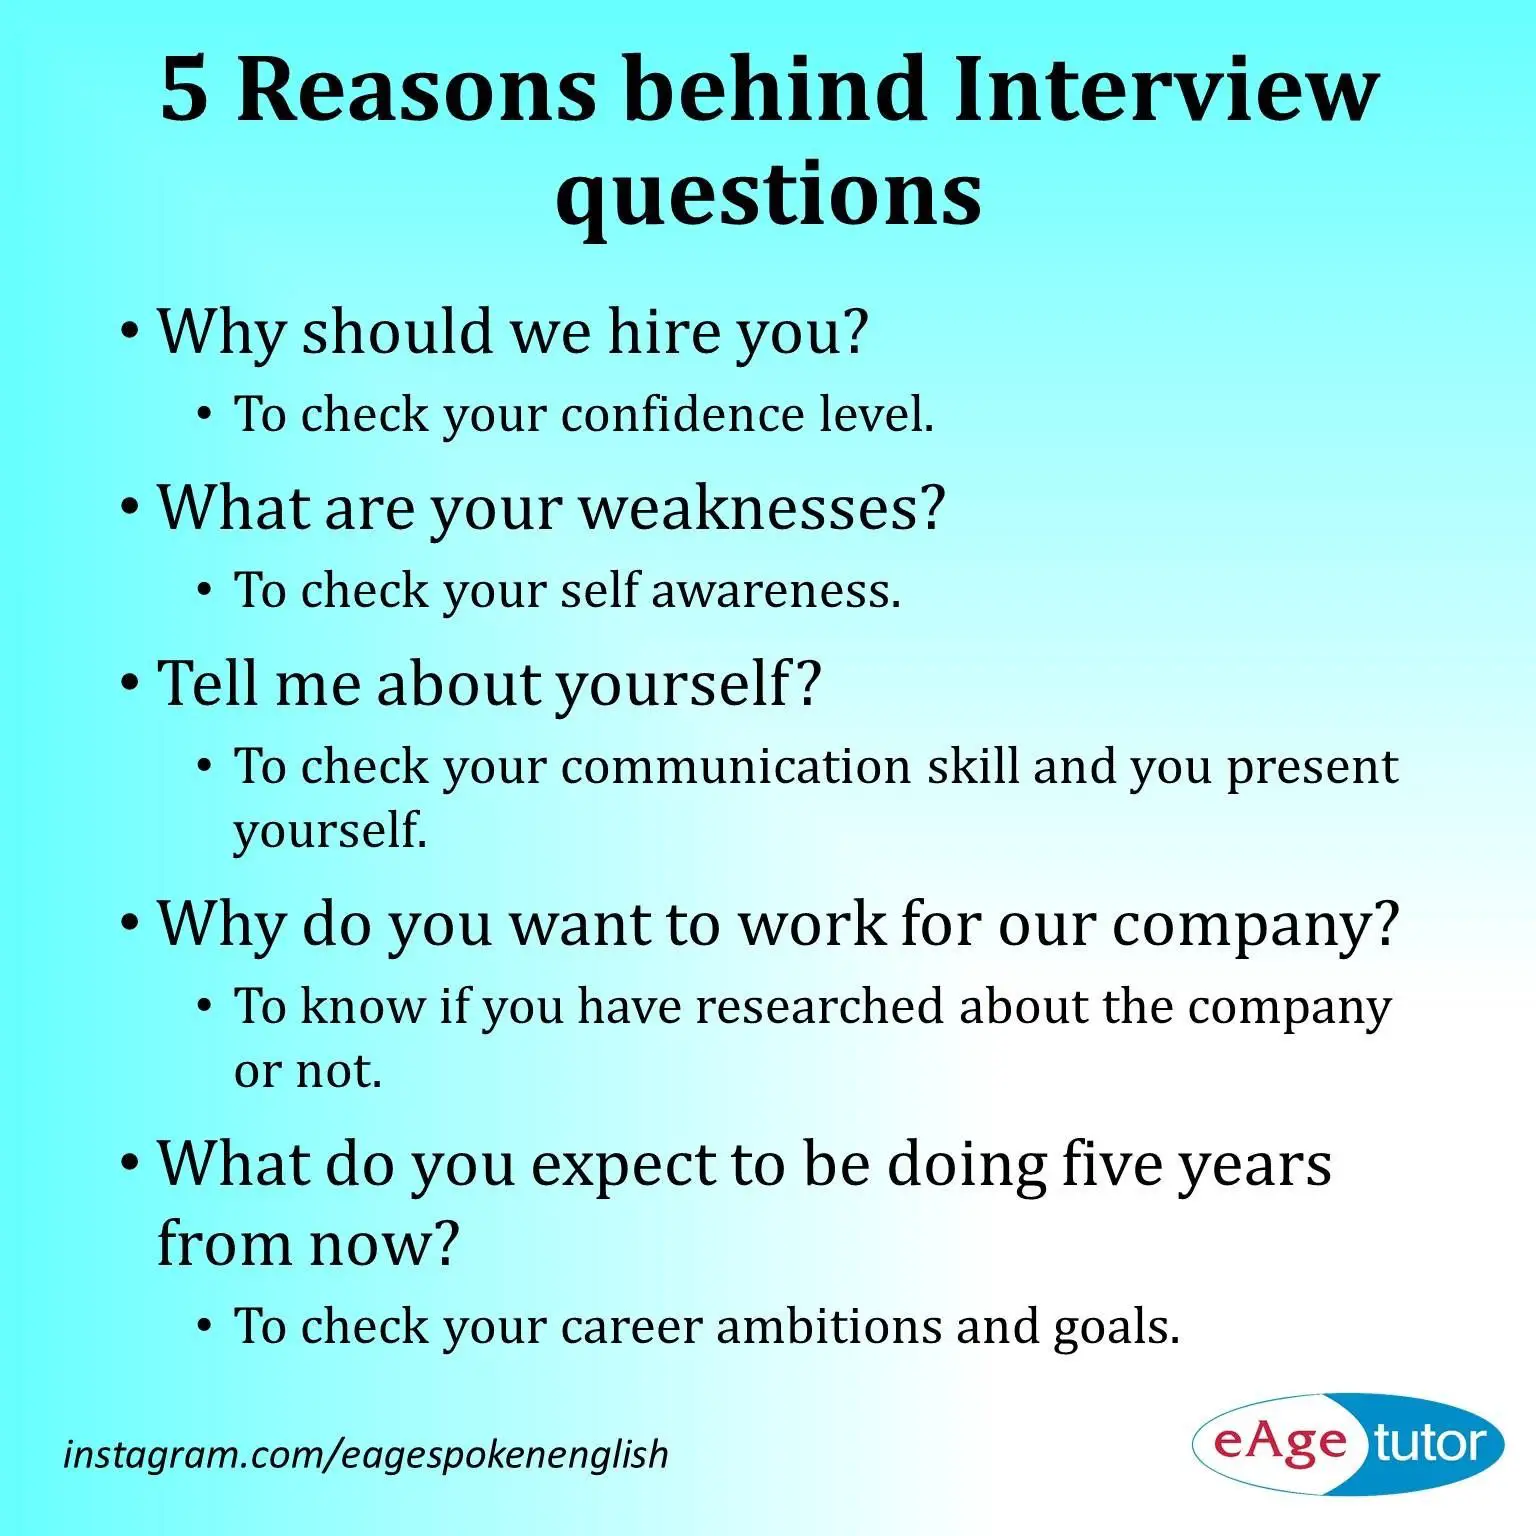 5 Reasons behind Interview questions